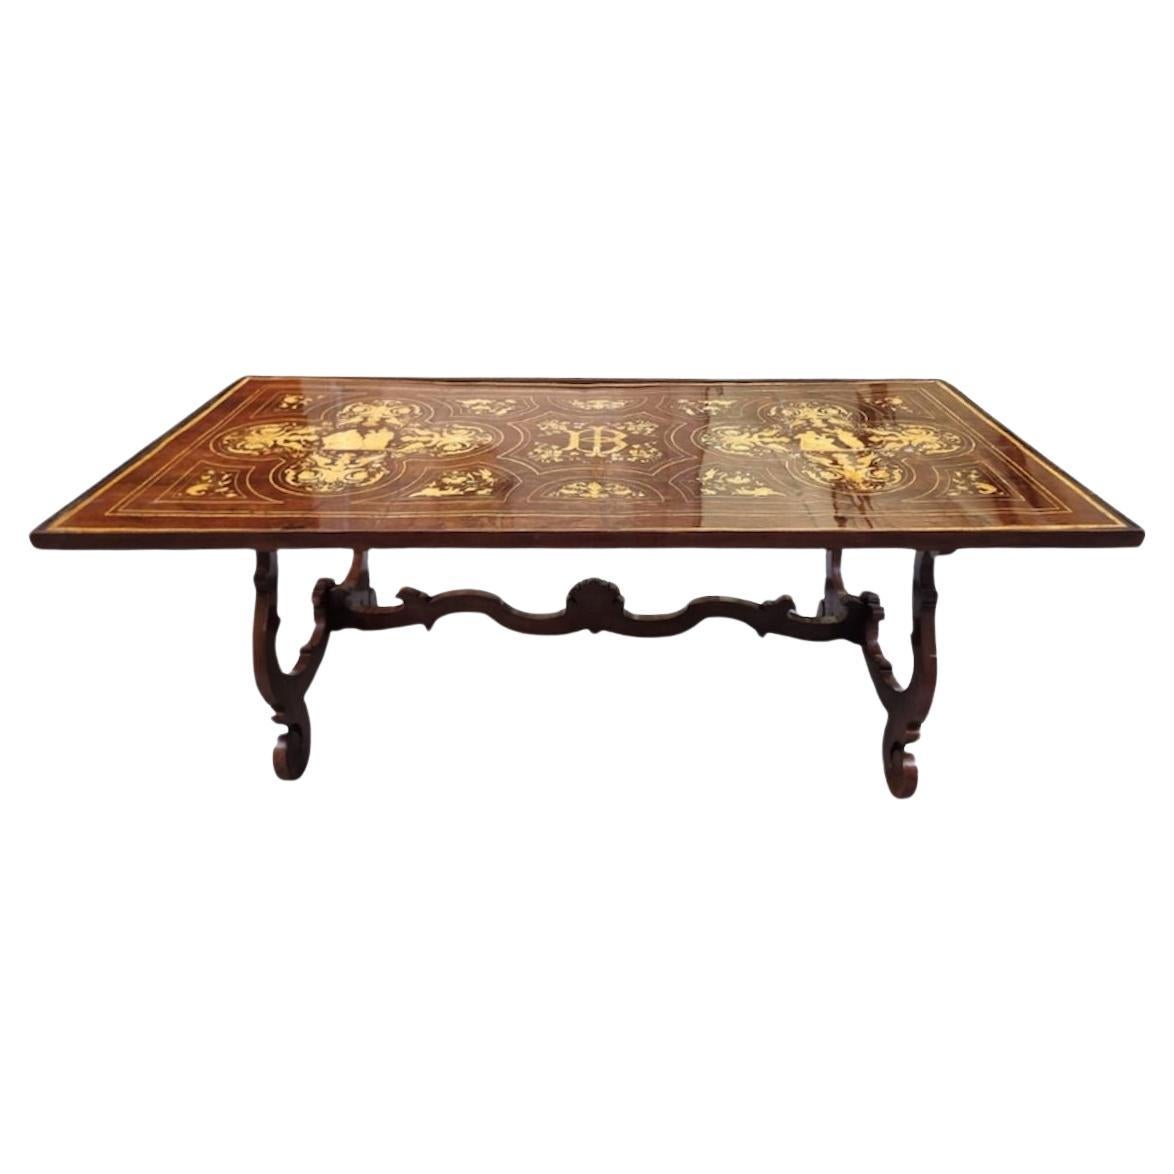 Florence capital inlaid walnut table  For Sale